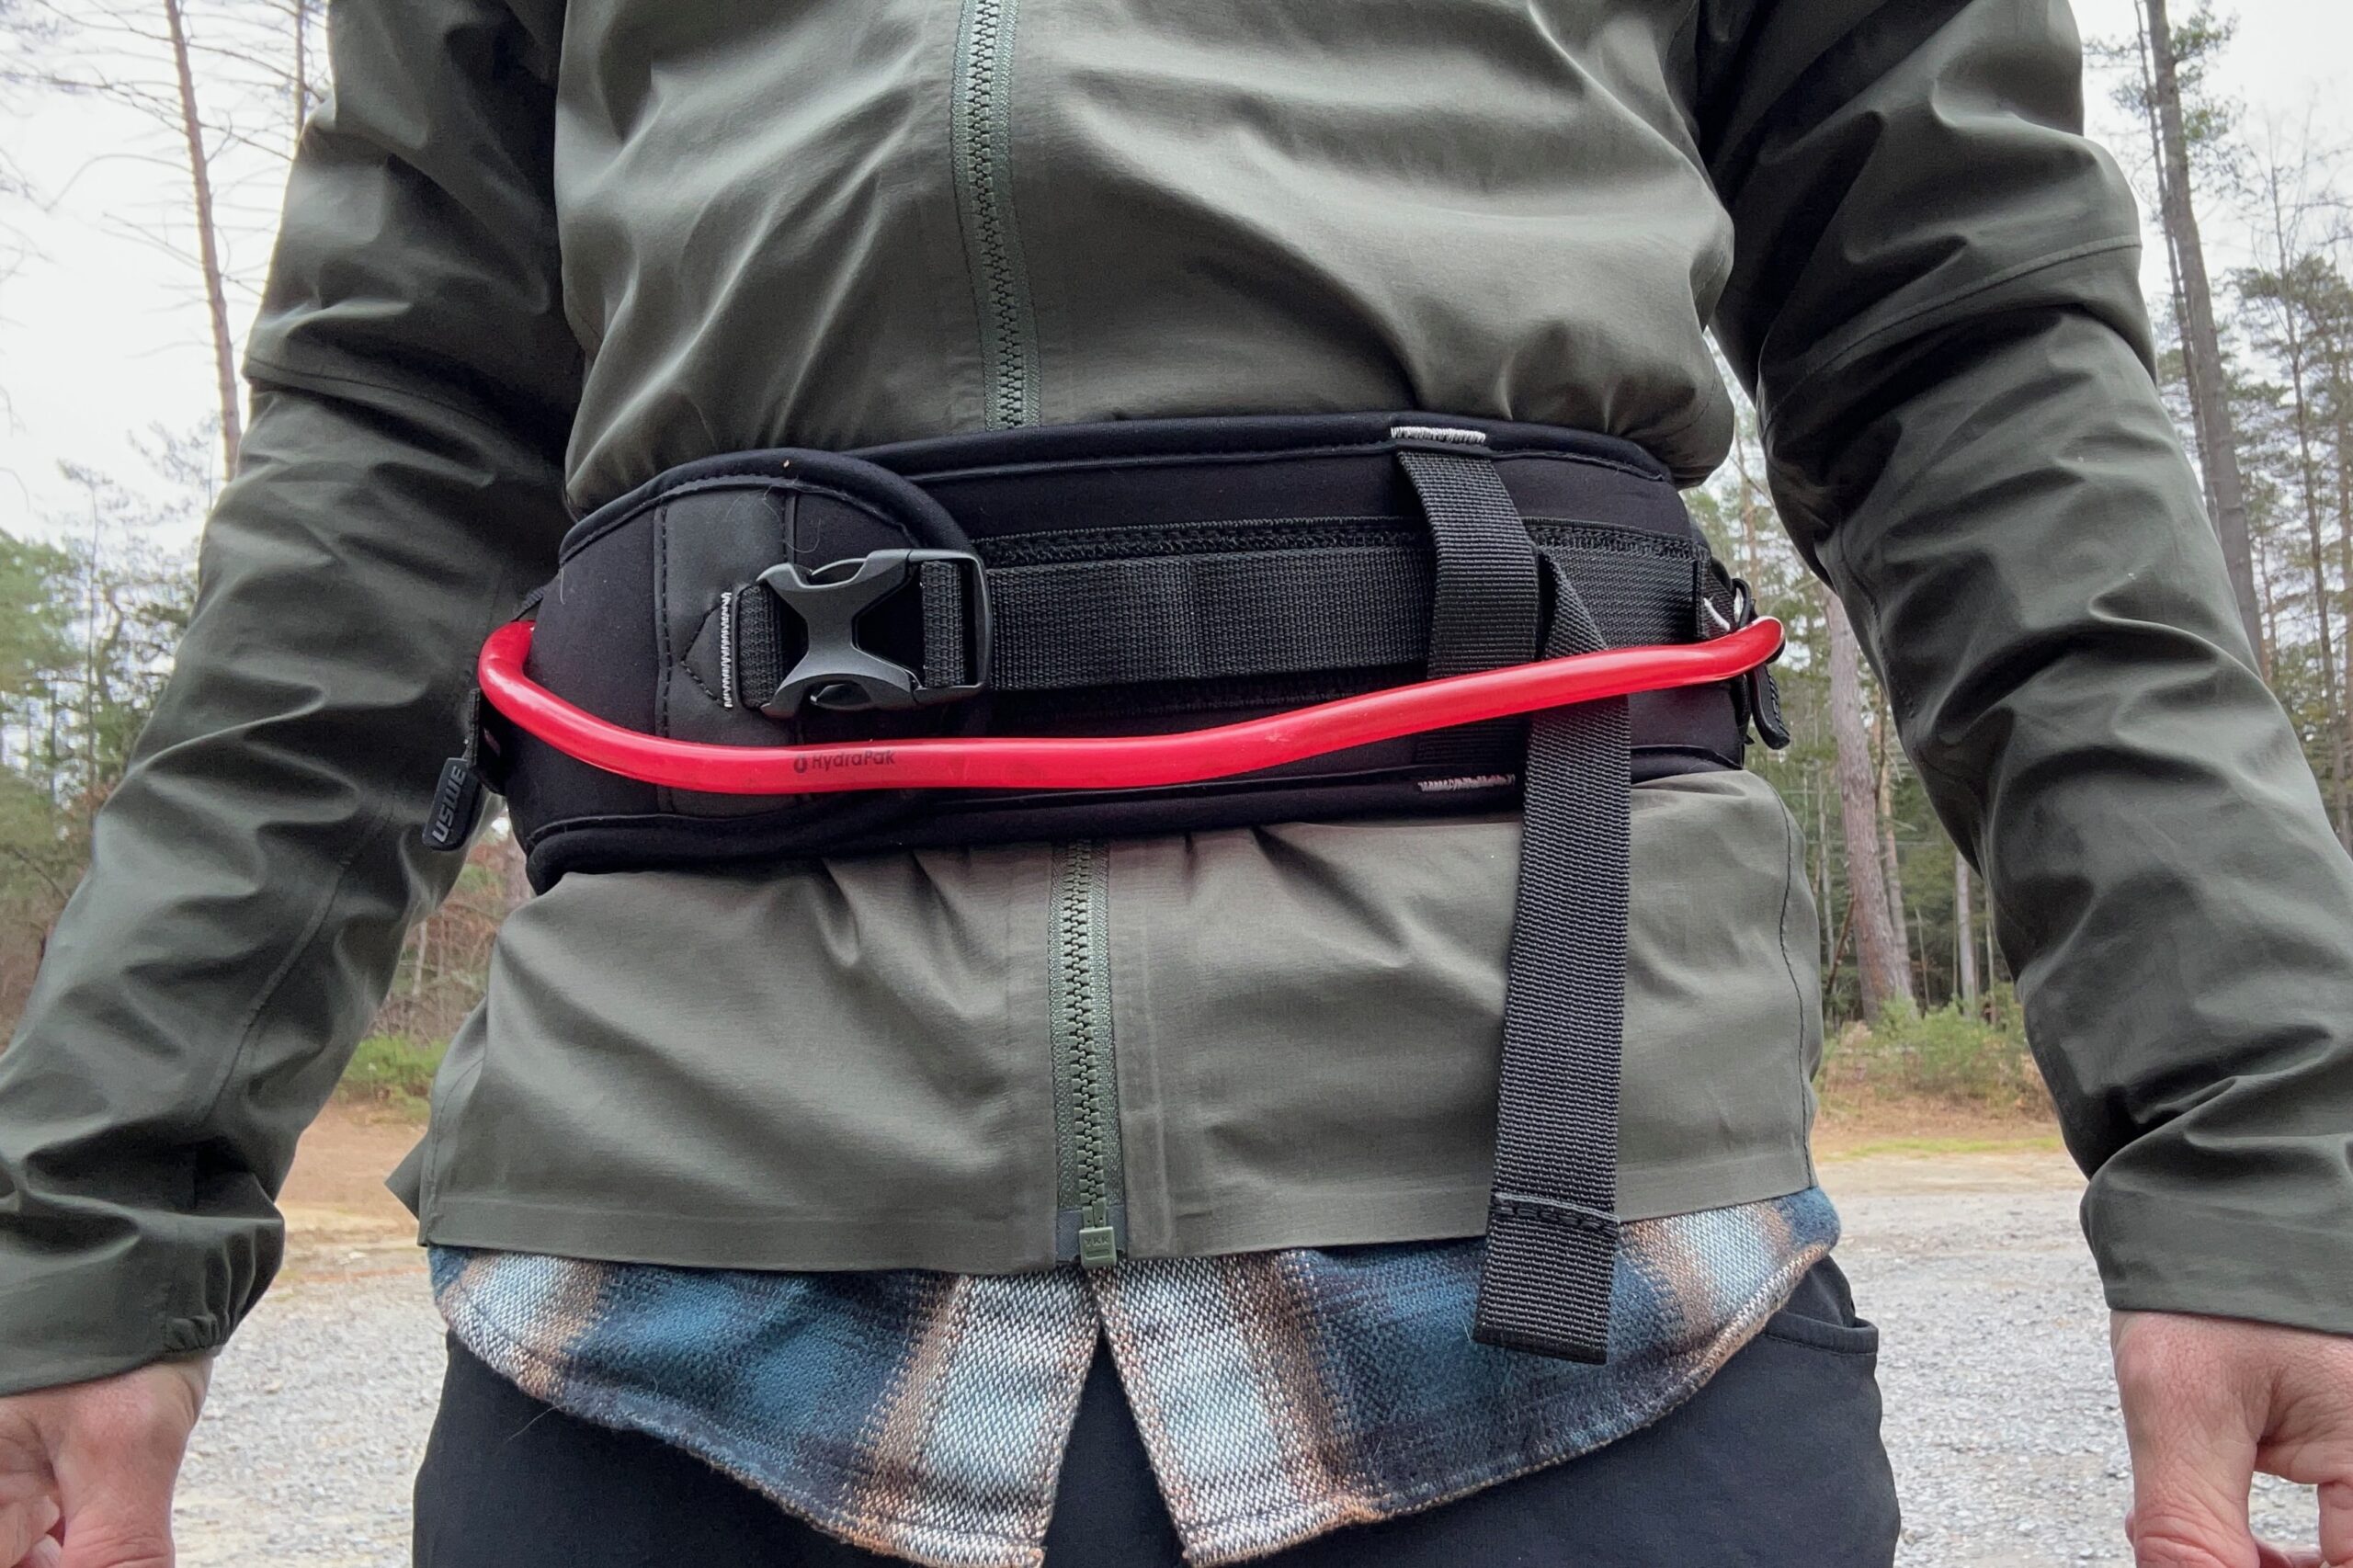 The wide, overlapping waist belt of the USWE Zulo 6 hip pack